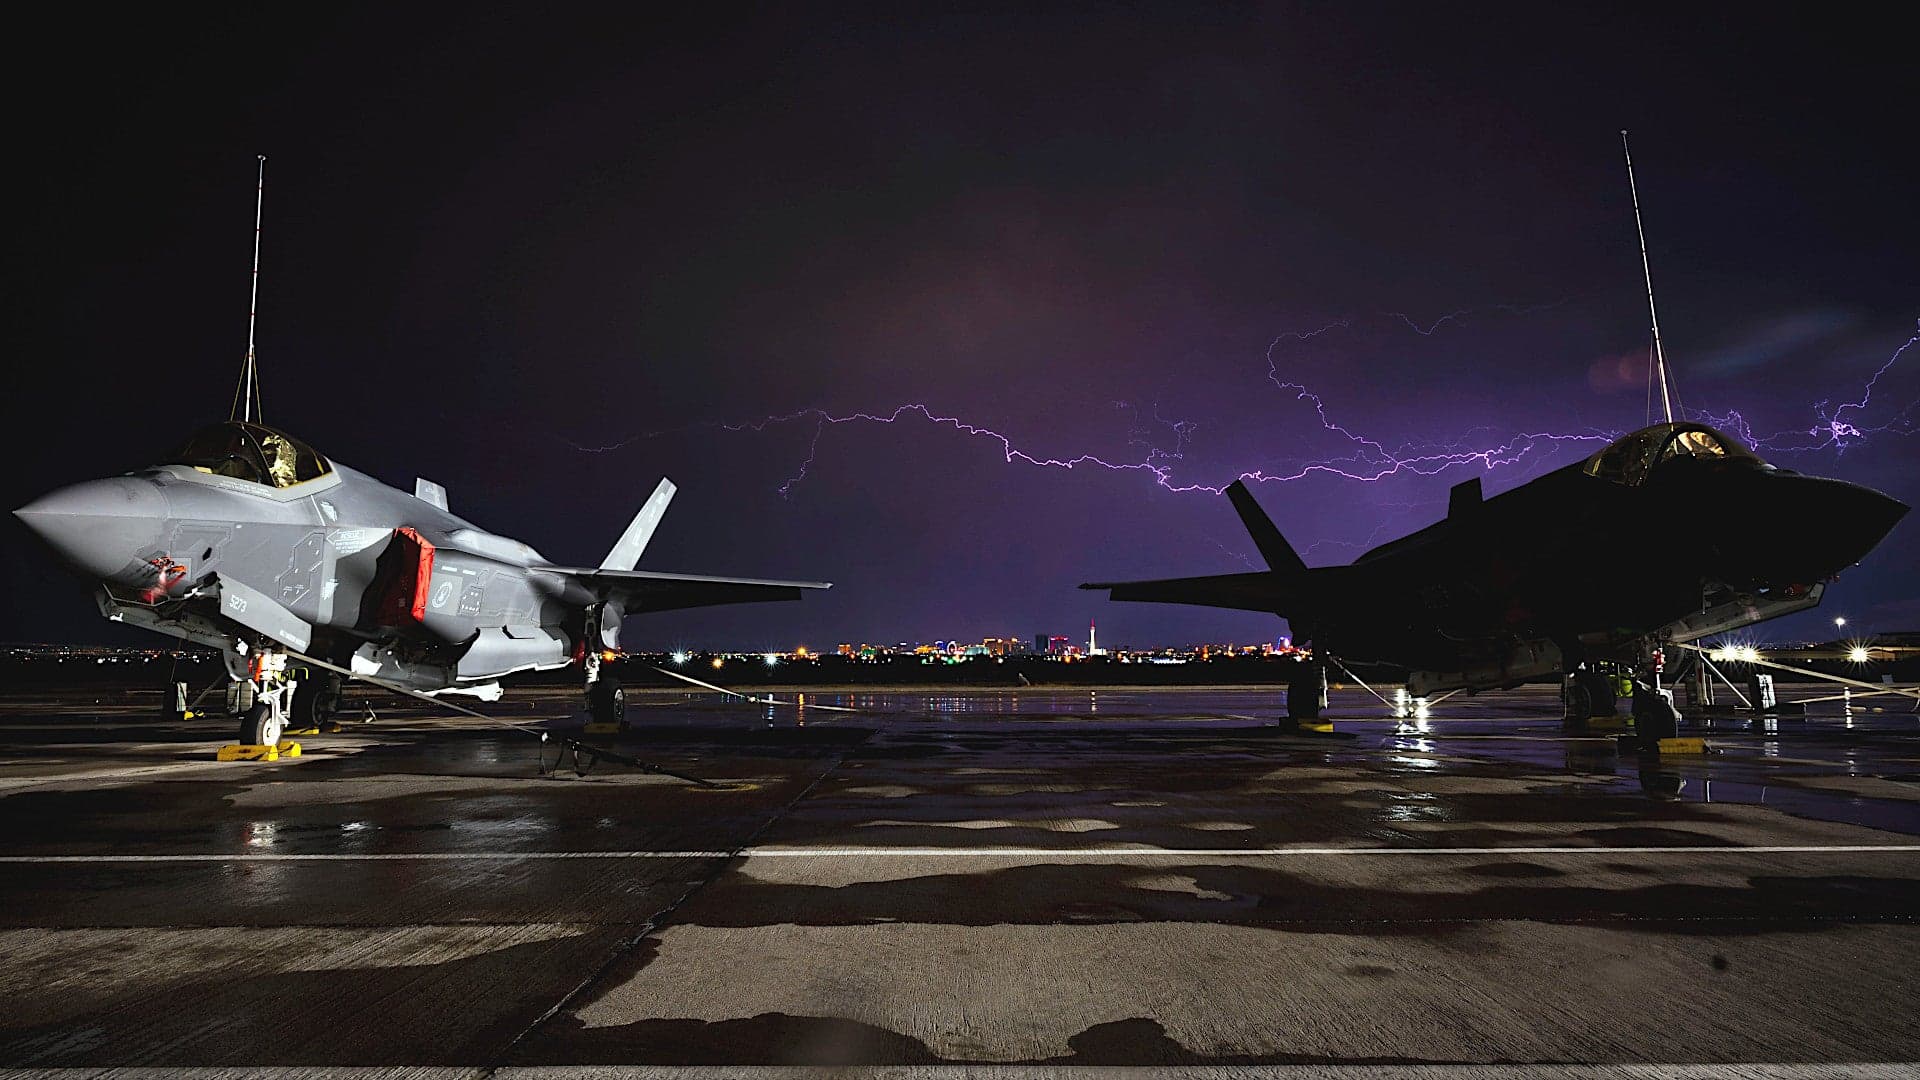 Air Force Tweet Showing F-35As Protected By Lightning Rods Asks “Which Lightning Strikes Harder?”